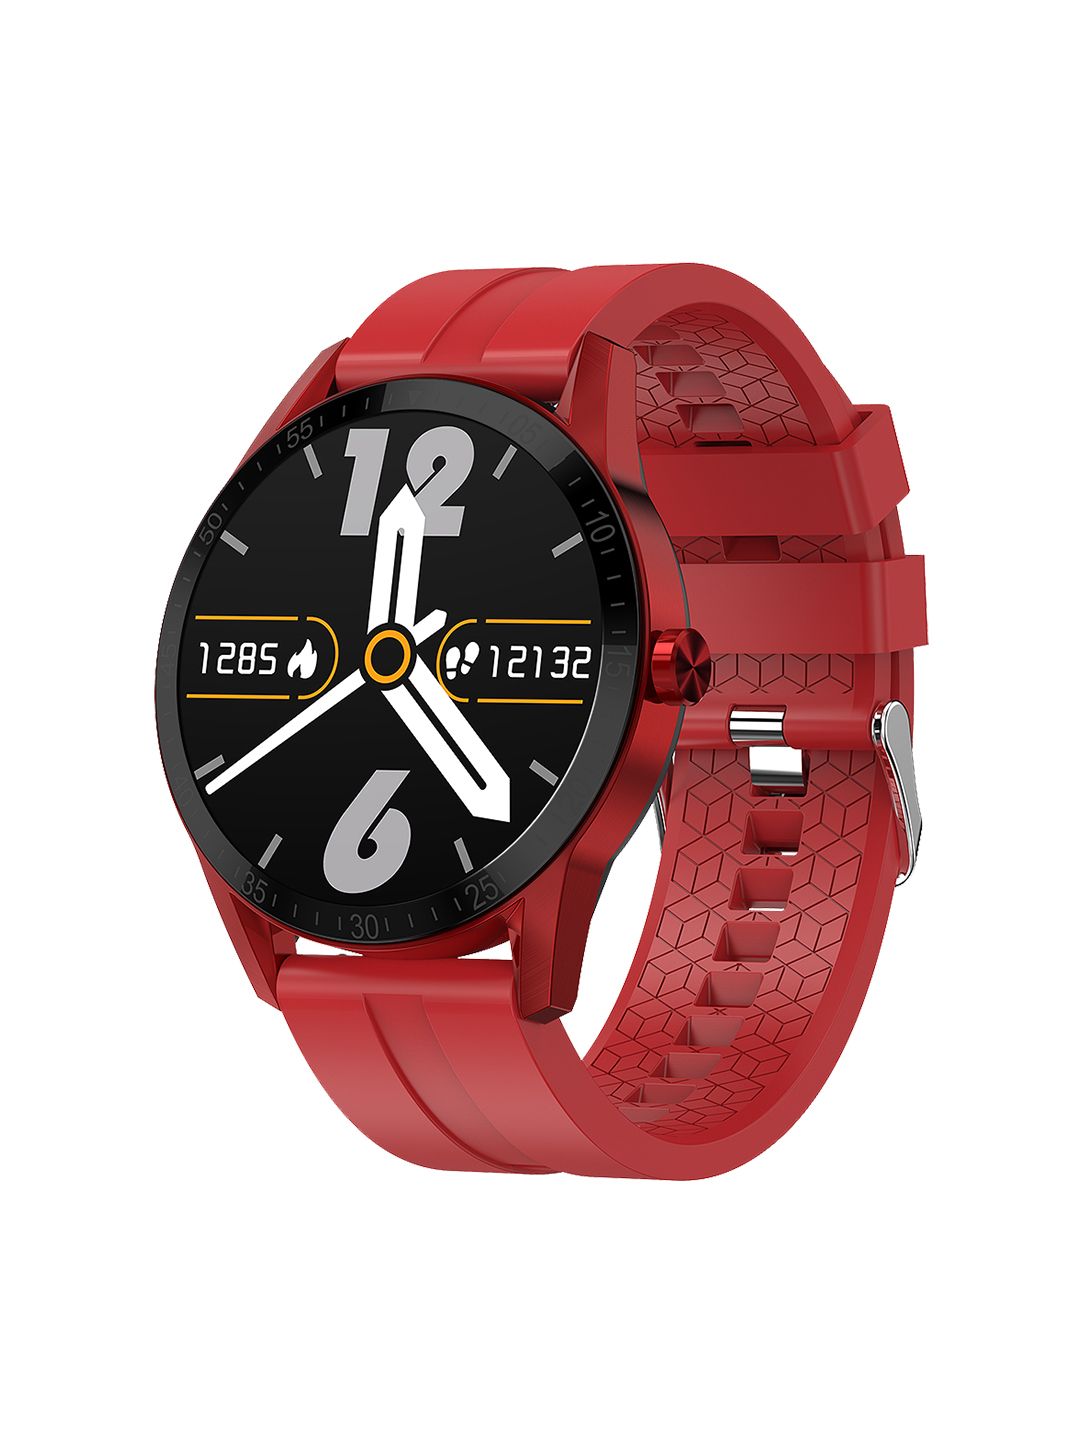 Fire-Boltt Talk Bluetooth Calling Smartwatch - Red 04BSWAAY#7 Price in India